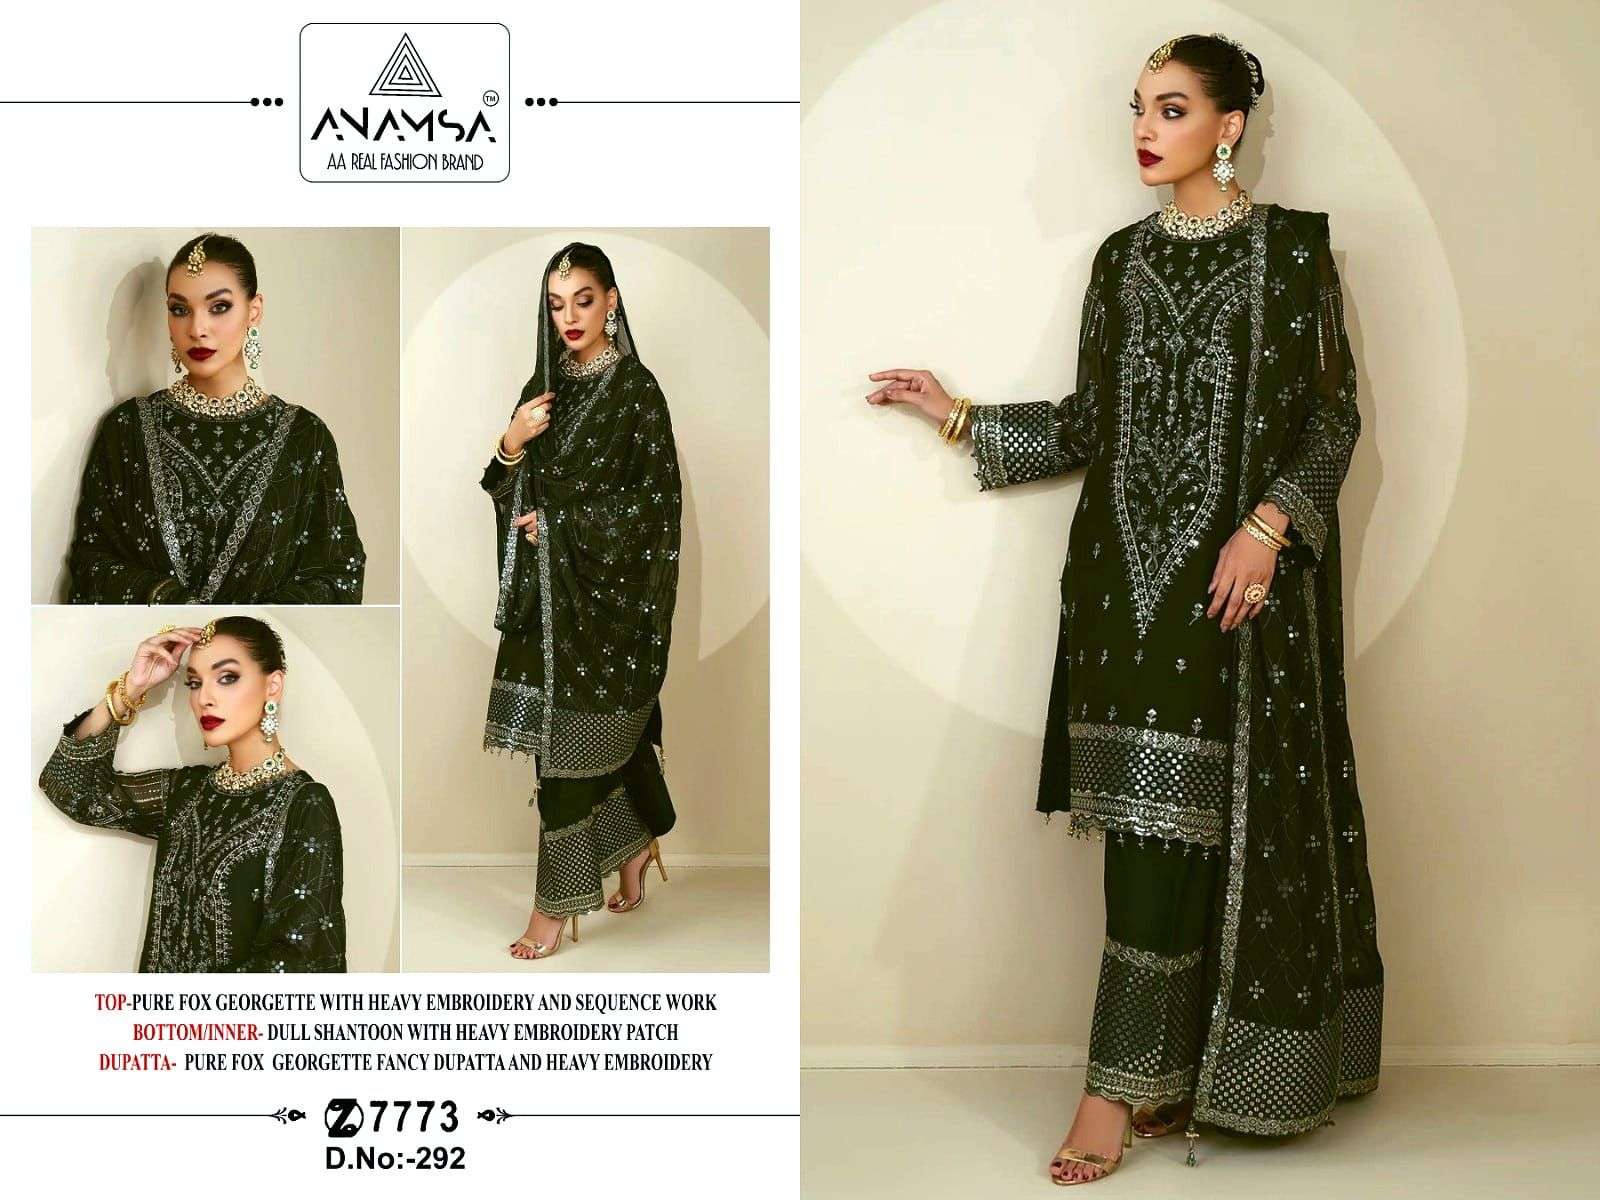 ANAMSA 292 GEORGETTE WITH EMBROIDERY WORK GREEN COLOUR PAKIS...